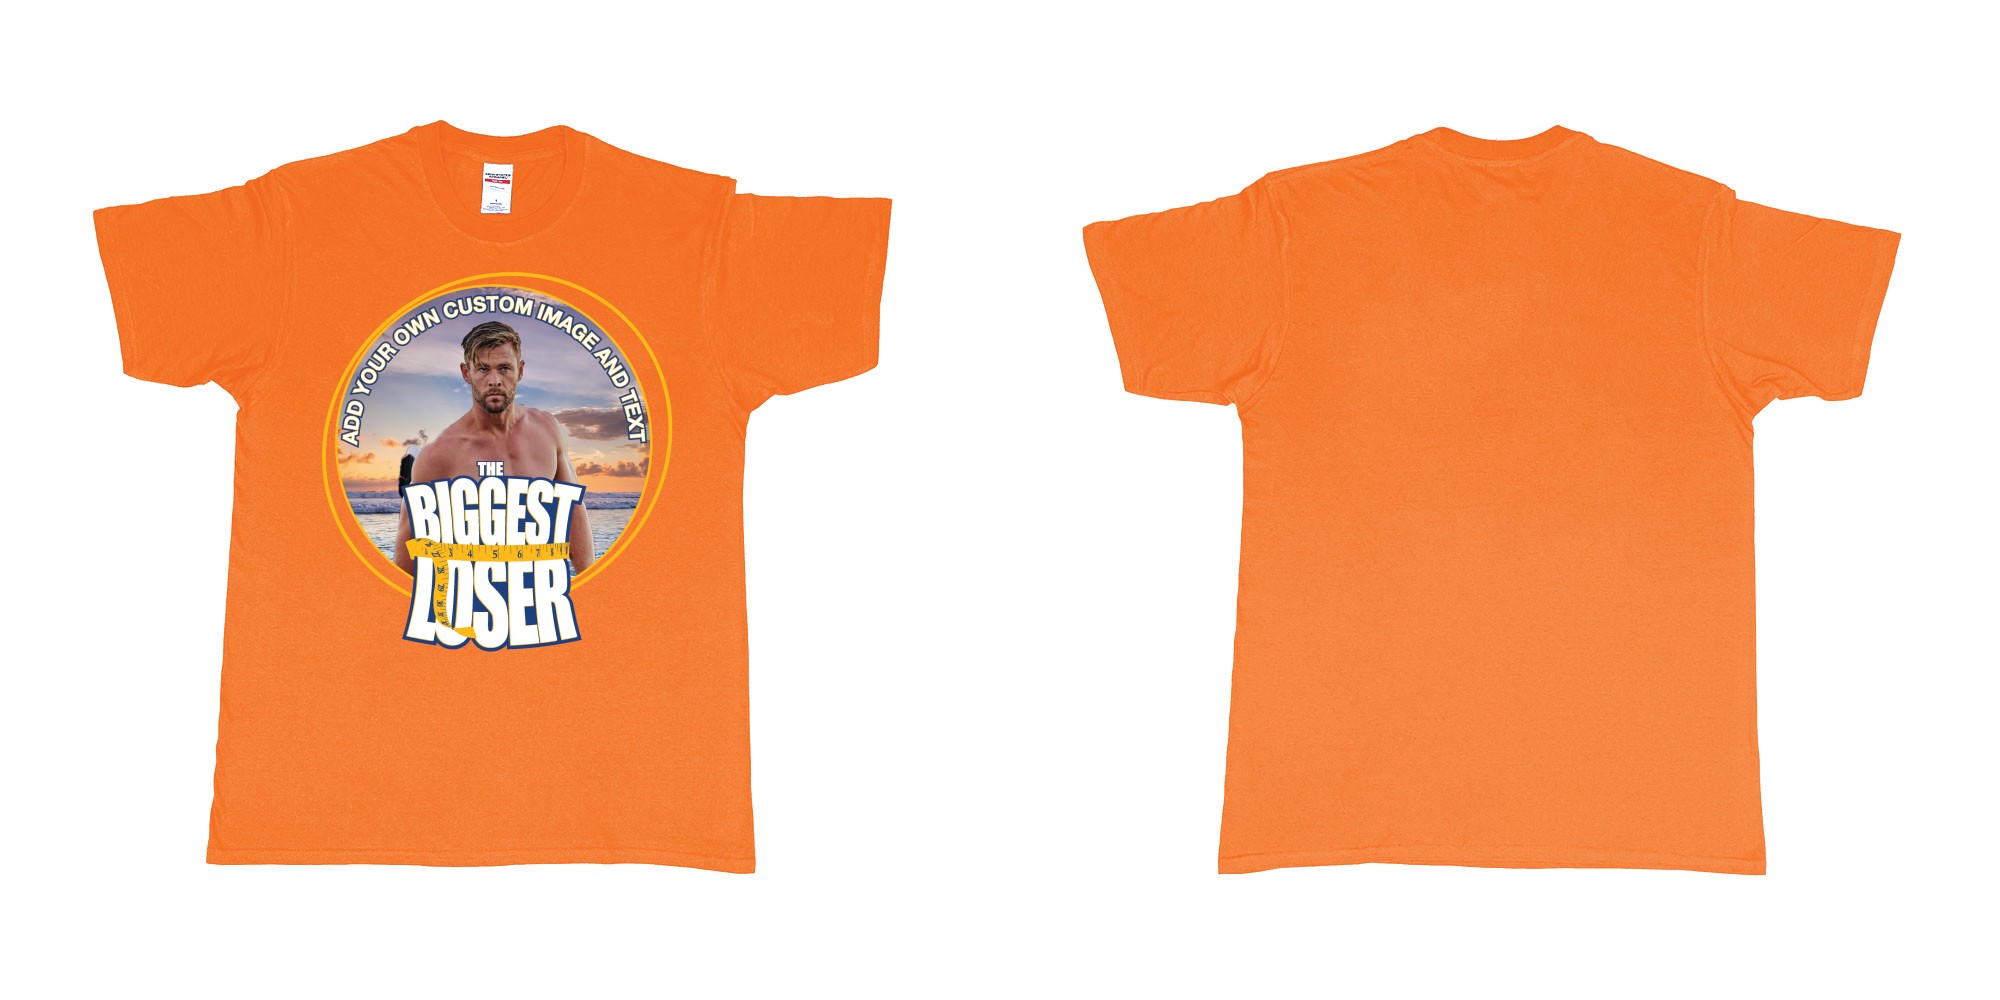 Custom tshirt design the biggest loser logo custom image funny tshirt design in fabric color orange choice your own text made in Bali by The Pirate Way